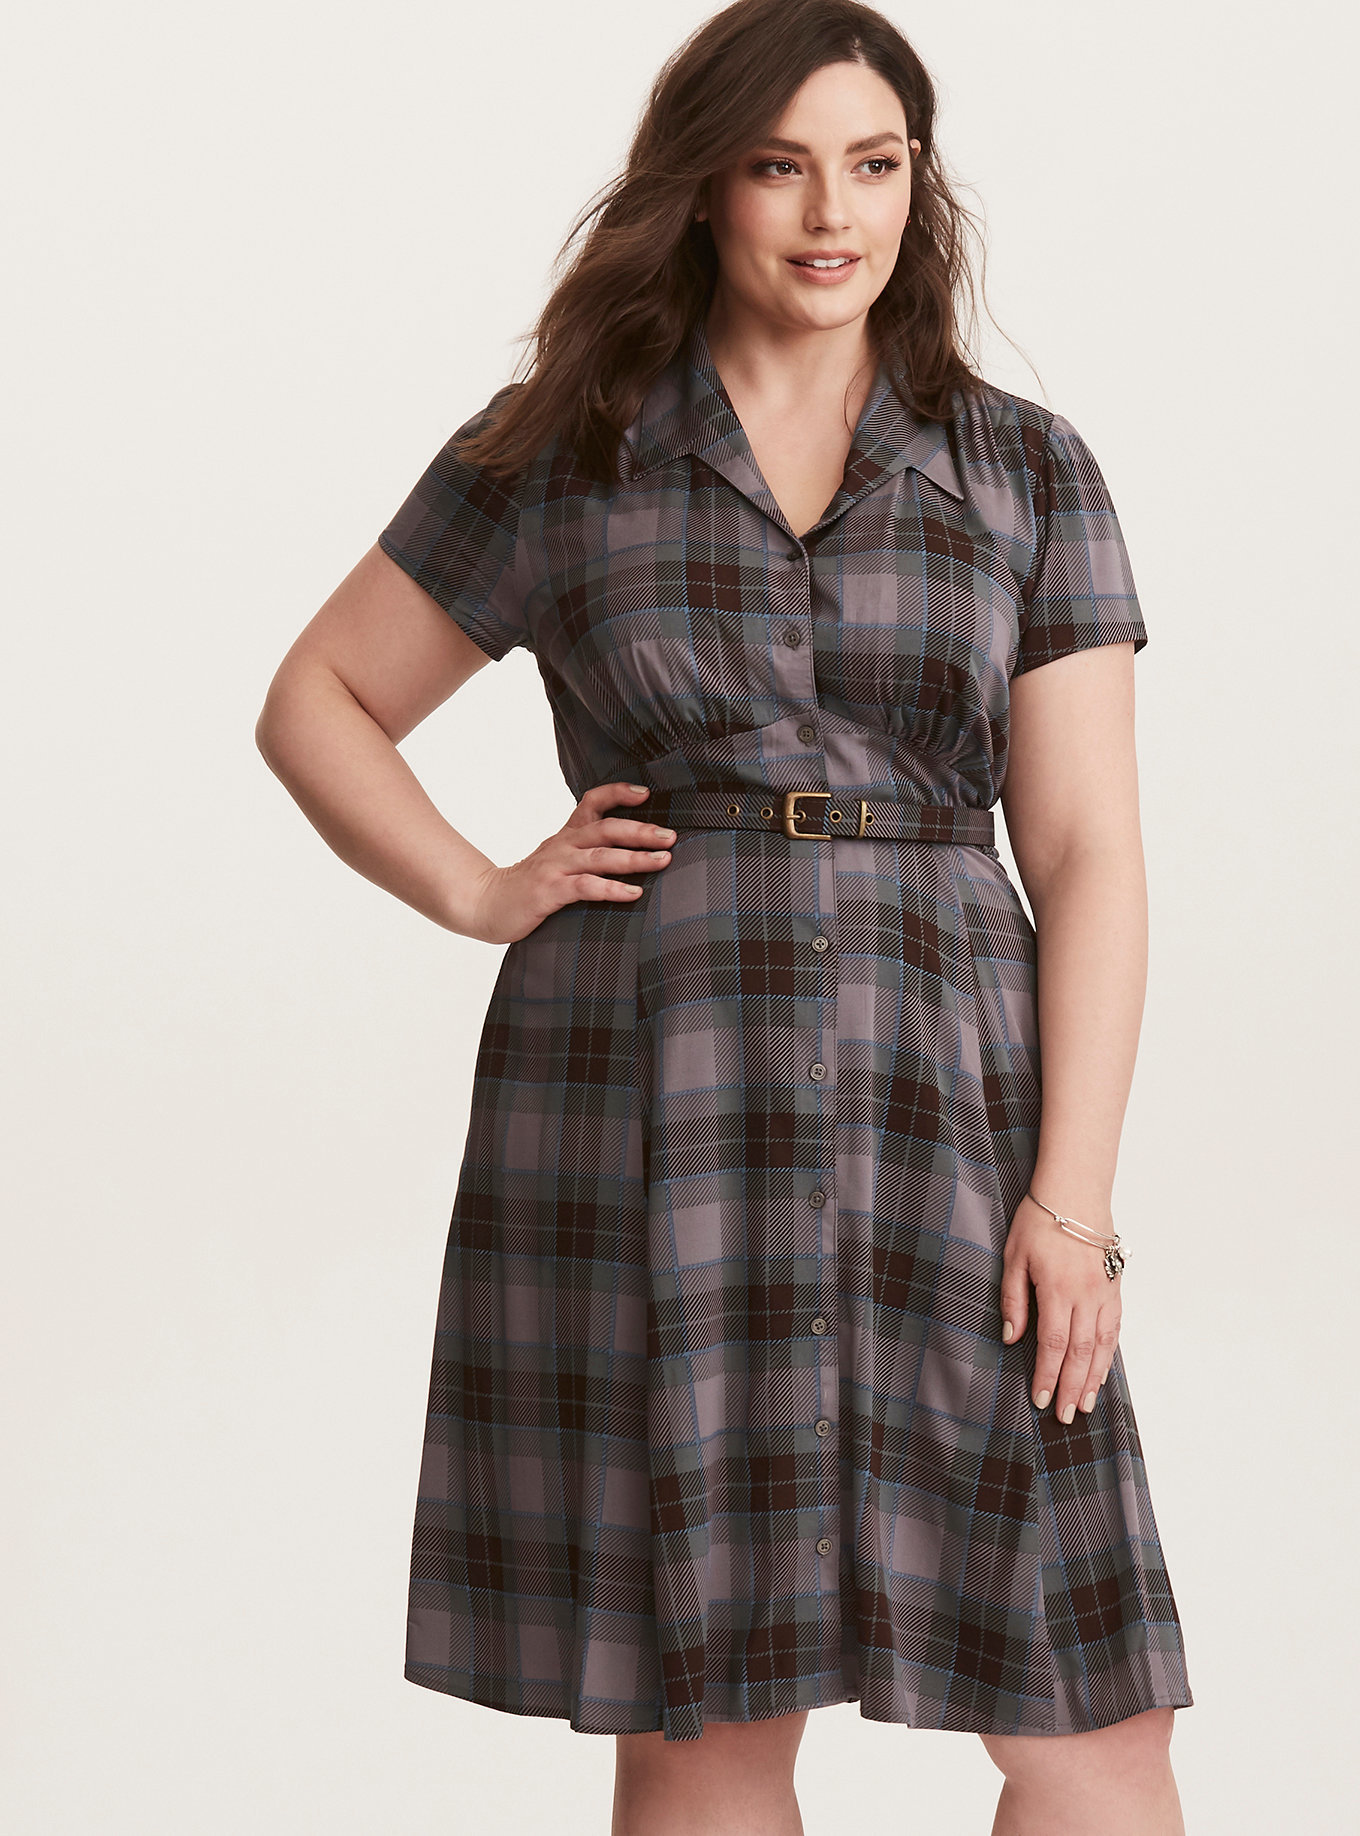 28 Button Down Dresses And Skirts For ...